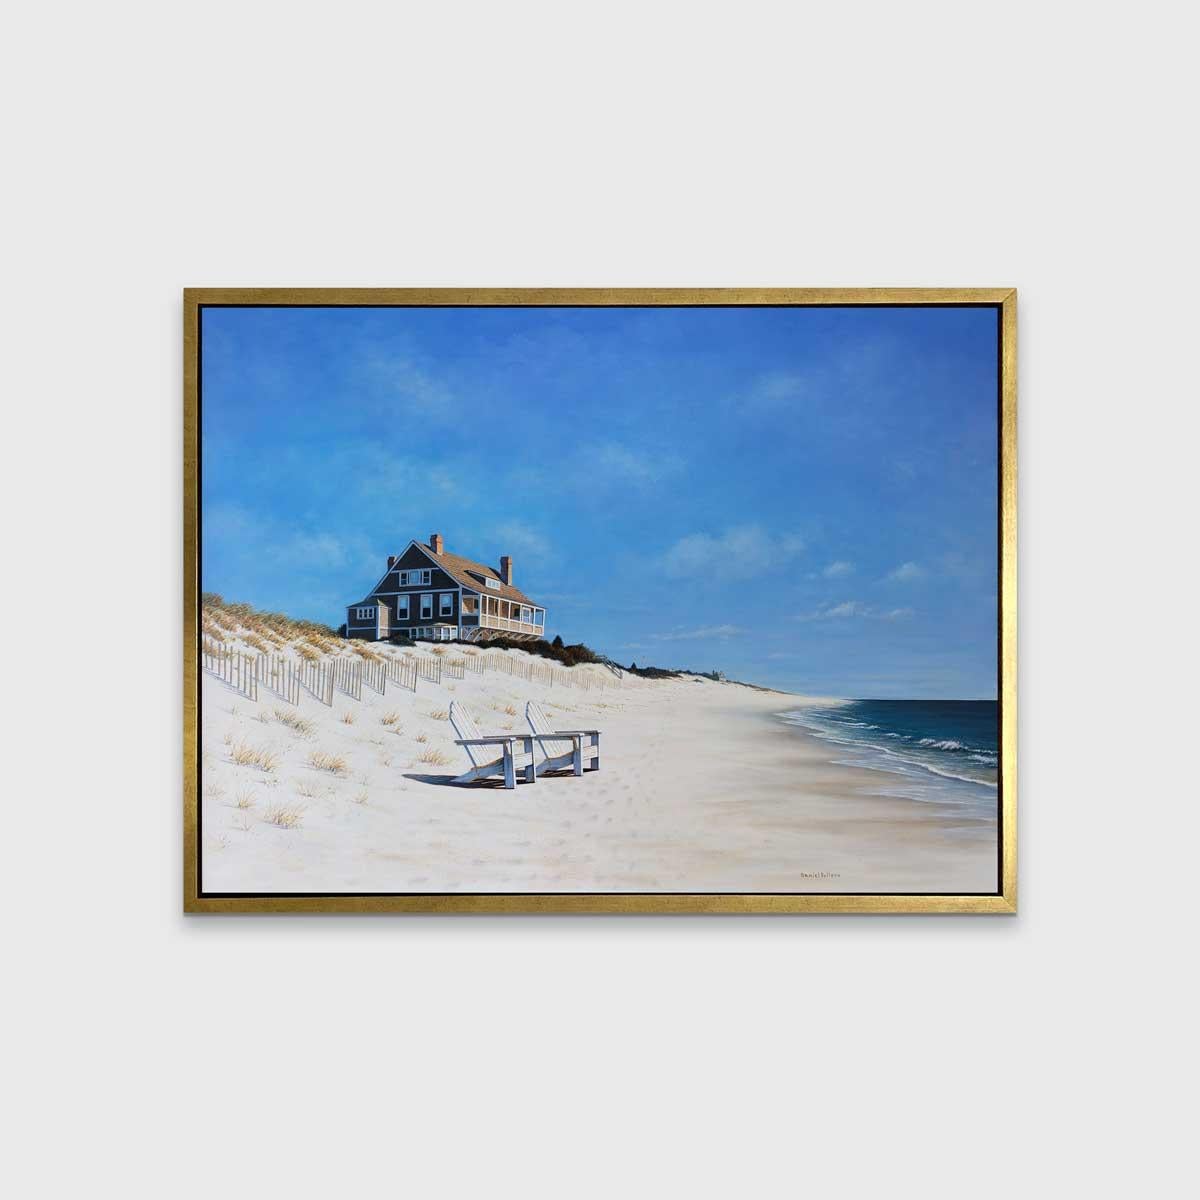 This contemporary coastal landscape is a Limited Edition print by Daniel Pollera. It depicts a sandy beach with waves rolling in from the right-hand side of the composition. Two Adirondack chairs are seated on the beach, in front of wooden fencing,